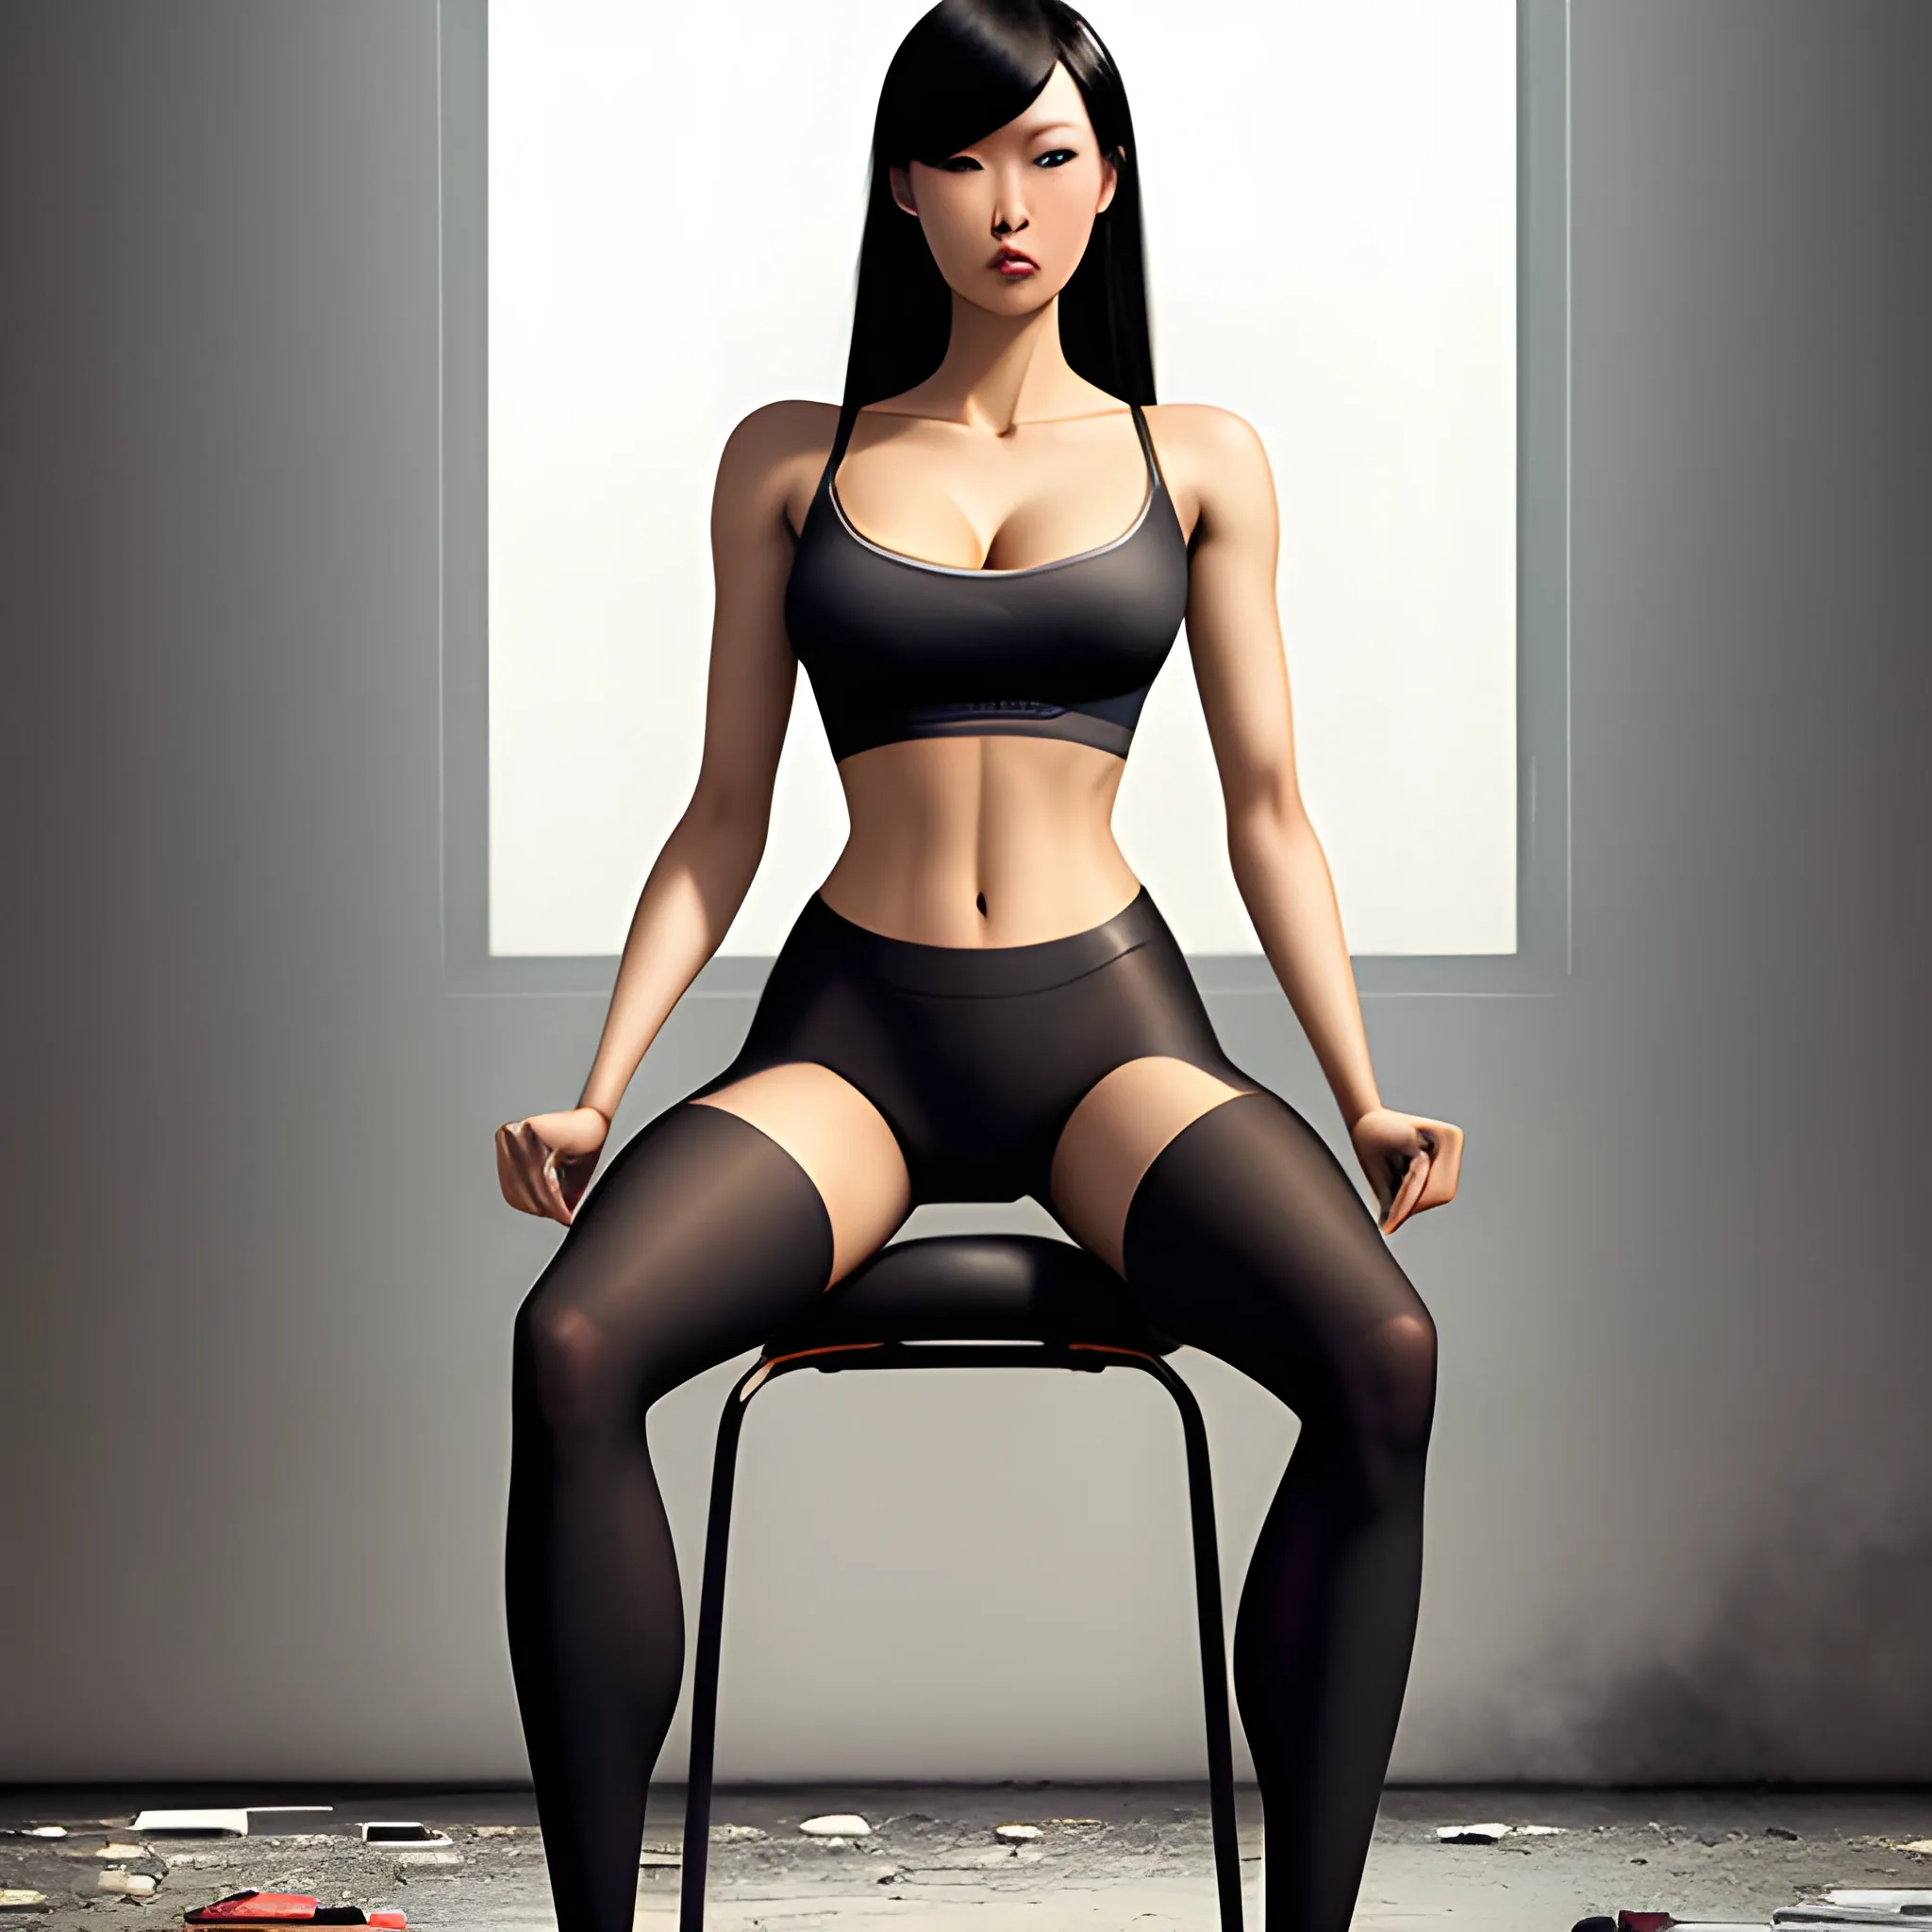 casual fashion shot of   korean cheap damsel in distress, wearing tights , cameltoe, longhaired, symmetric face, manga eyes,  full figure, fit,  office outfit, legs, knees, high heels, sitting on the chair in the demolished class, school, revenge, sinister art by Greg Rutkowski, 